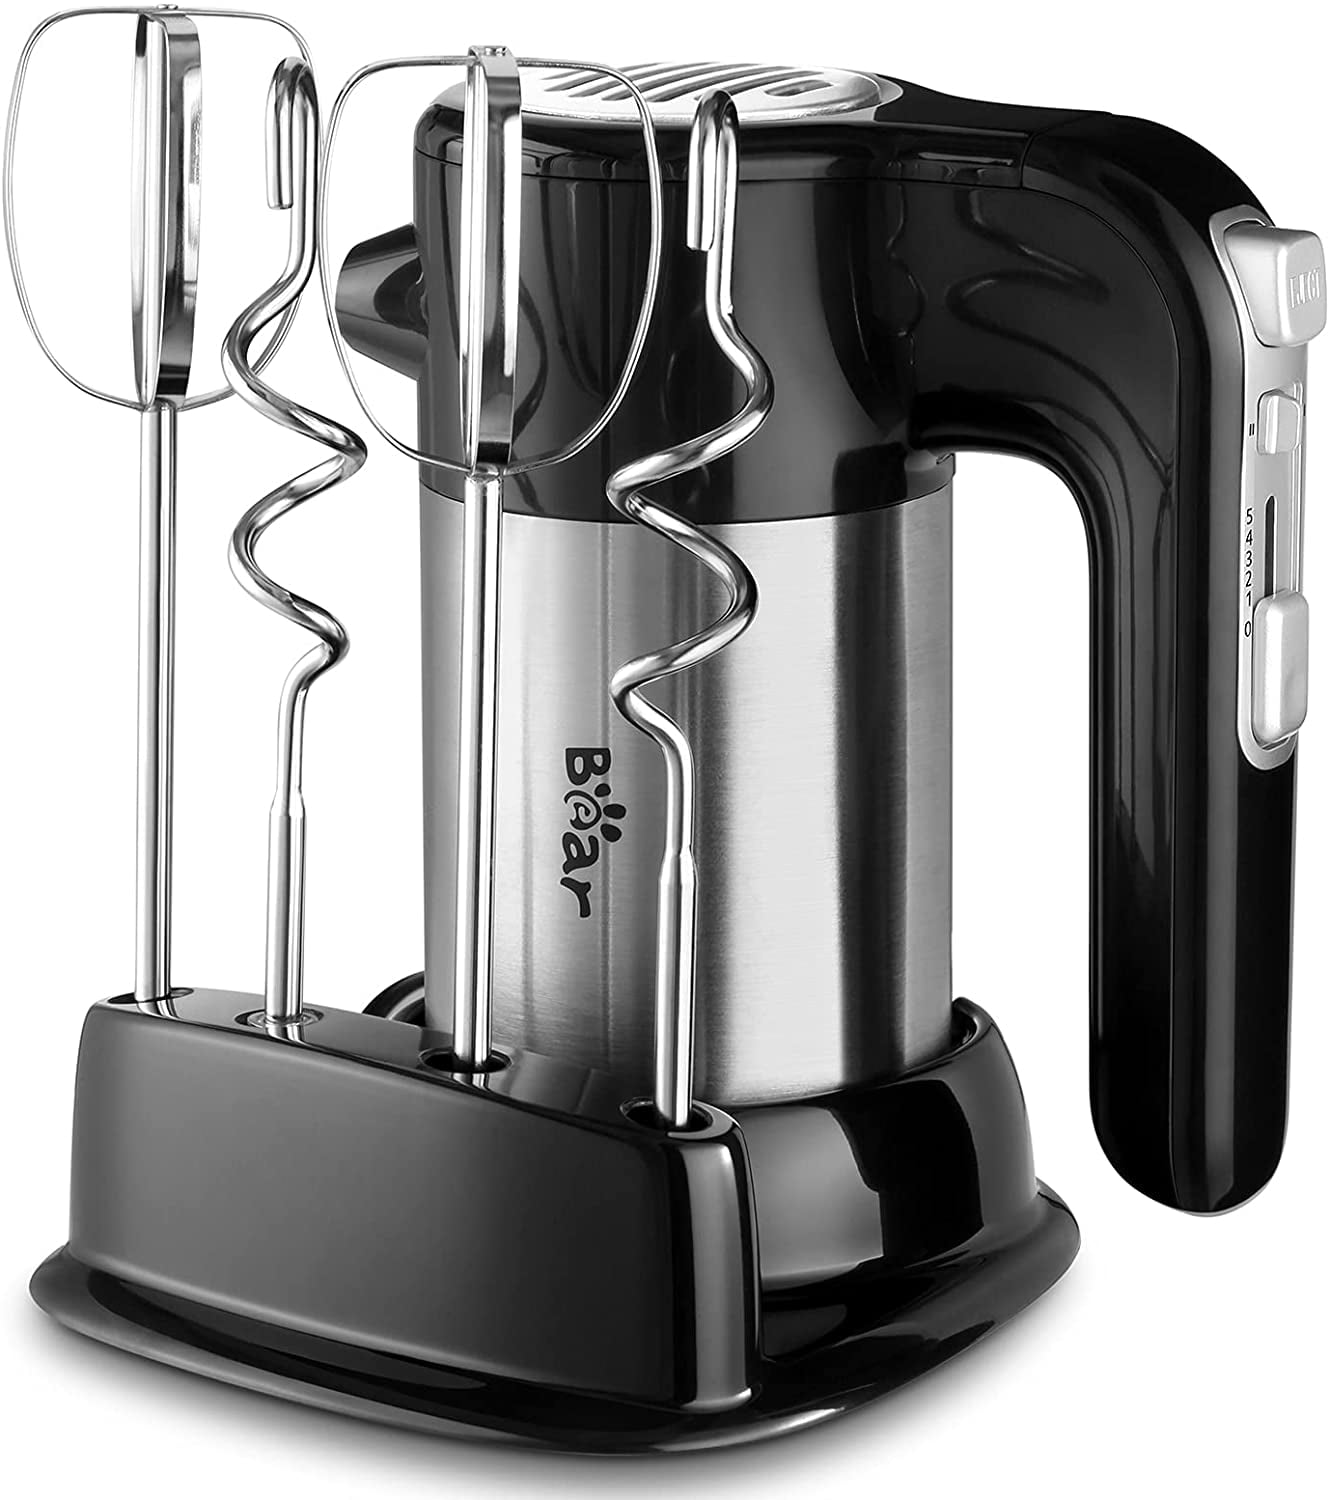 Details about   Bear Hand Mixer Electric Ejec 300W Power Handheld Mixer With Turbo Boost 